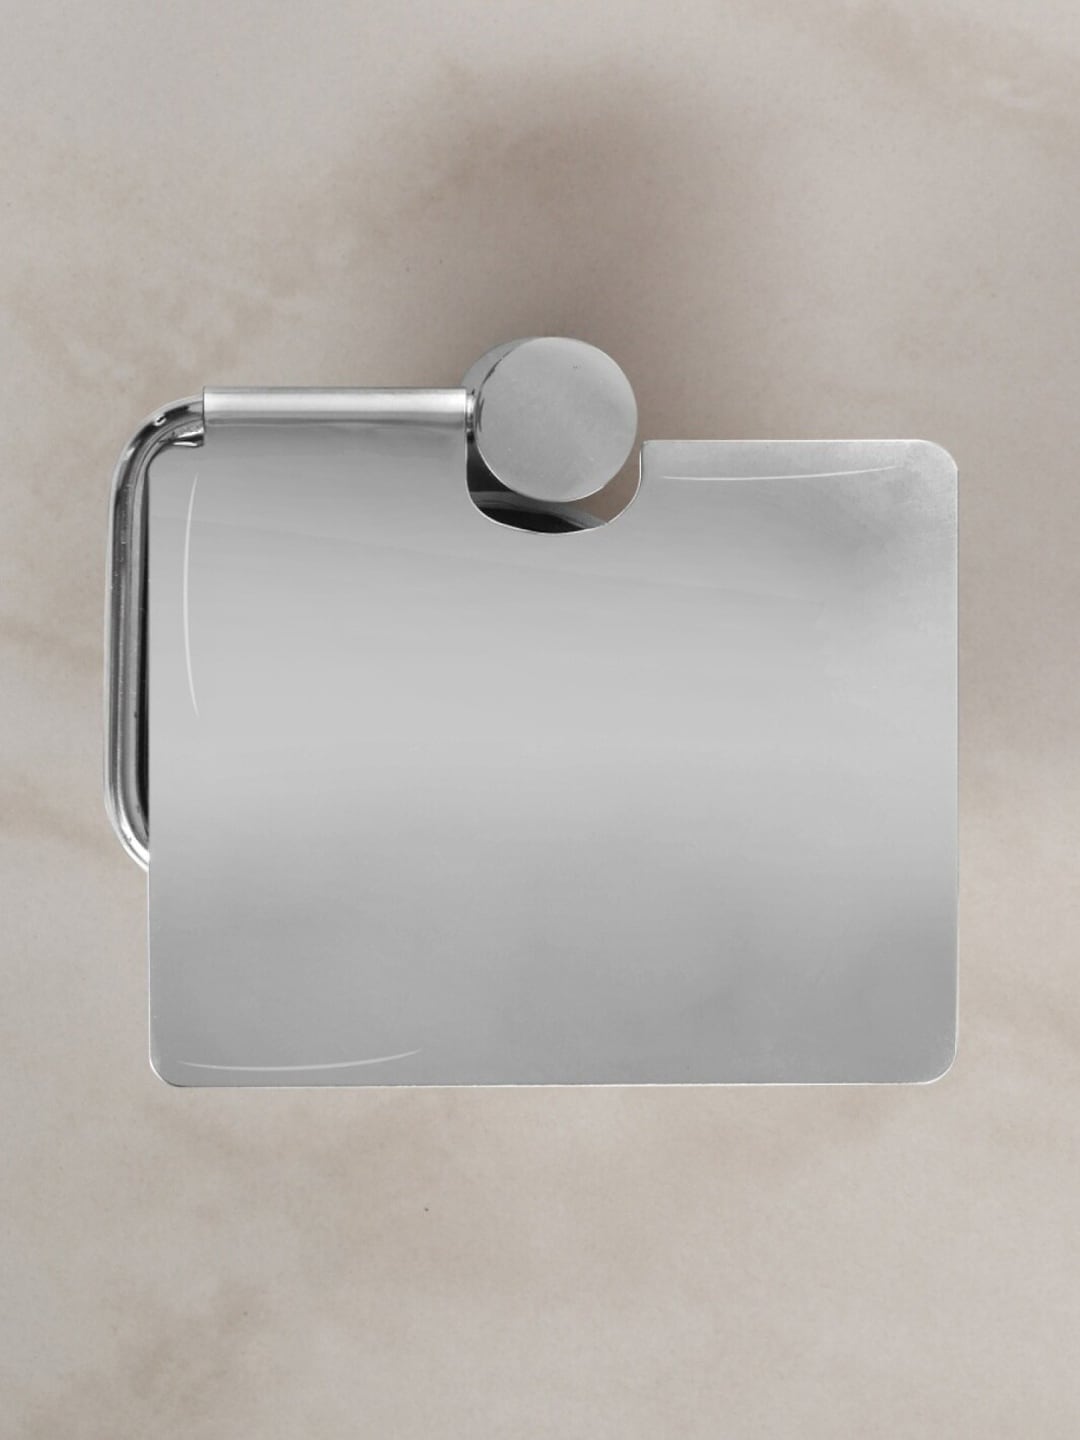 Home Centre Silver-Toned Adrian Aeron Toilet Paper Holder With Flap Price in India